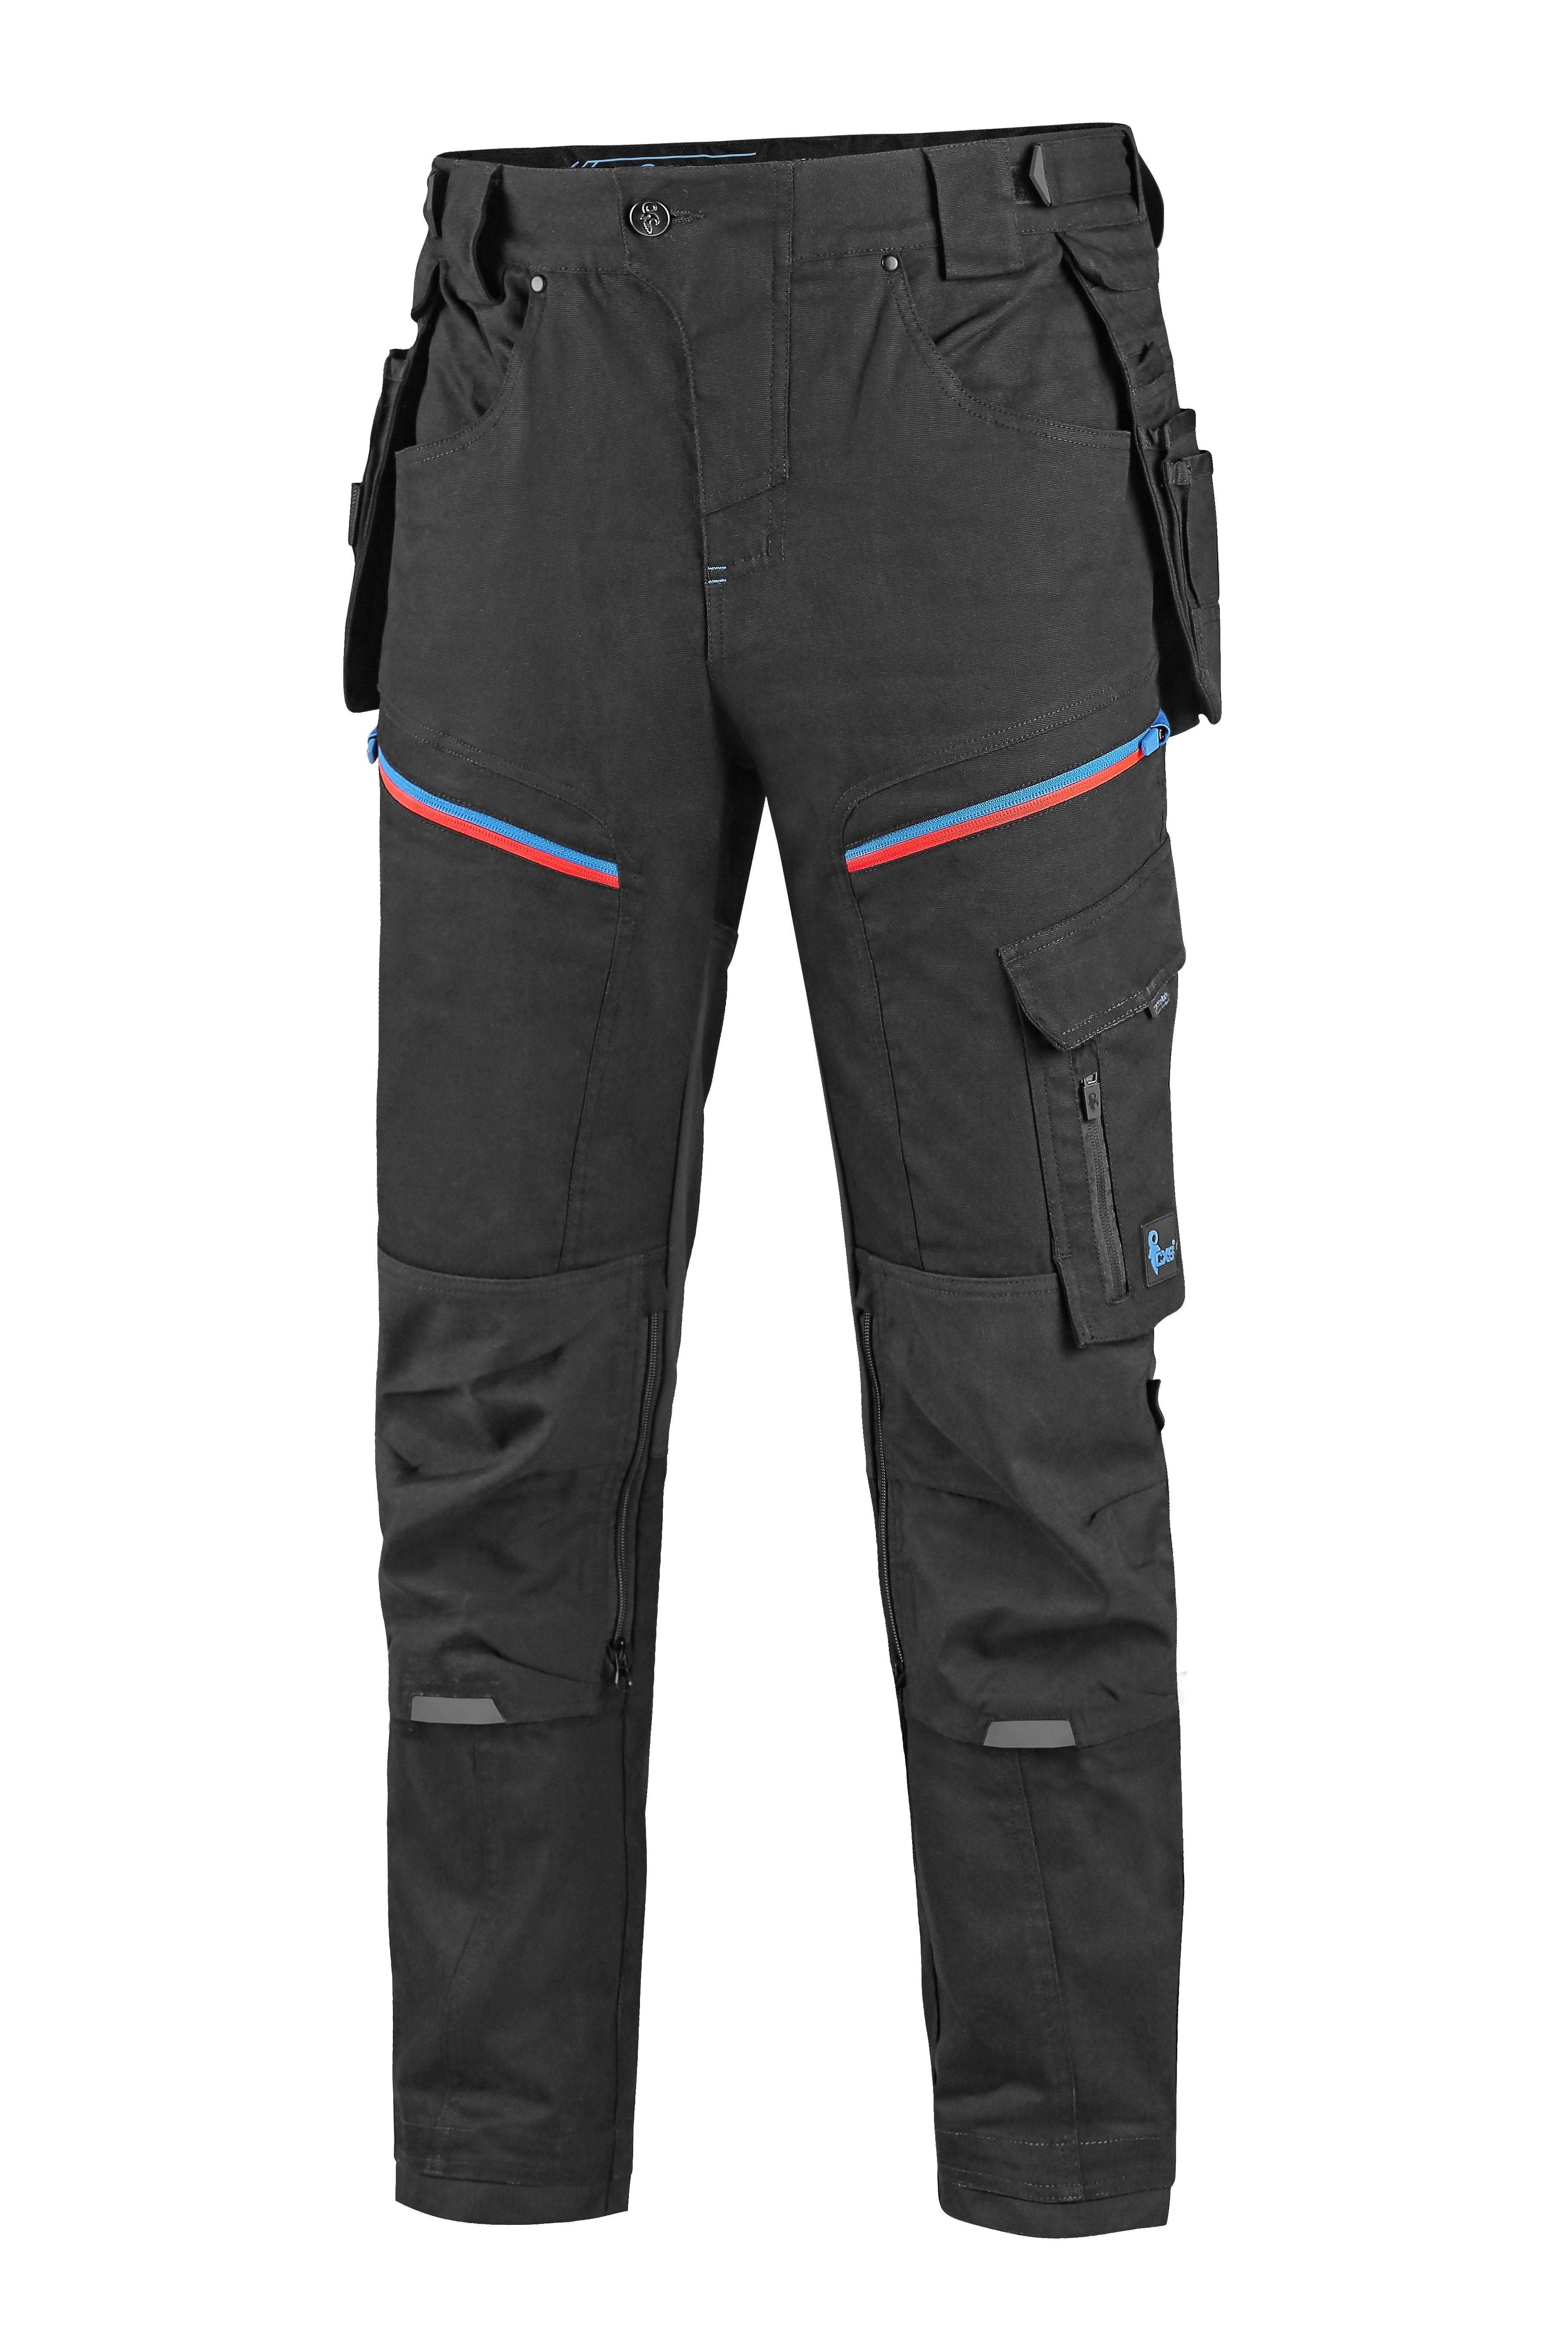 CXS LEONIS, MEN'S, WORK PANTS, BLACK WITH BLUE/RED ACCESSORIES